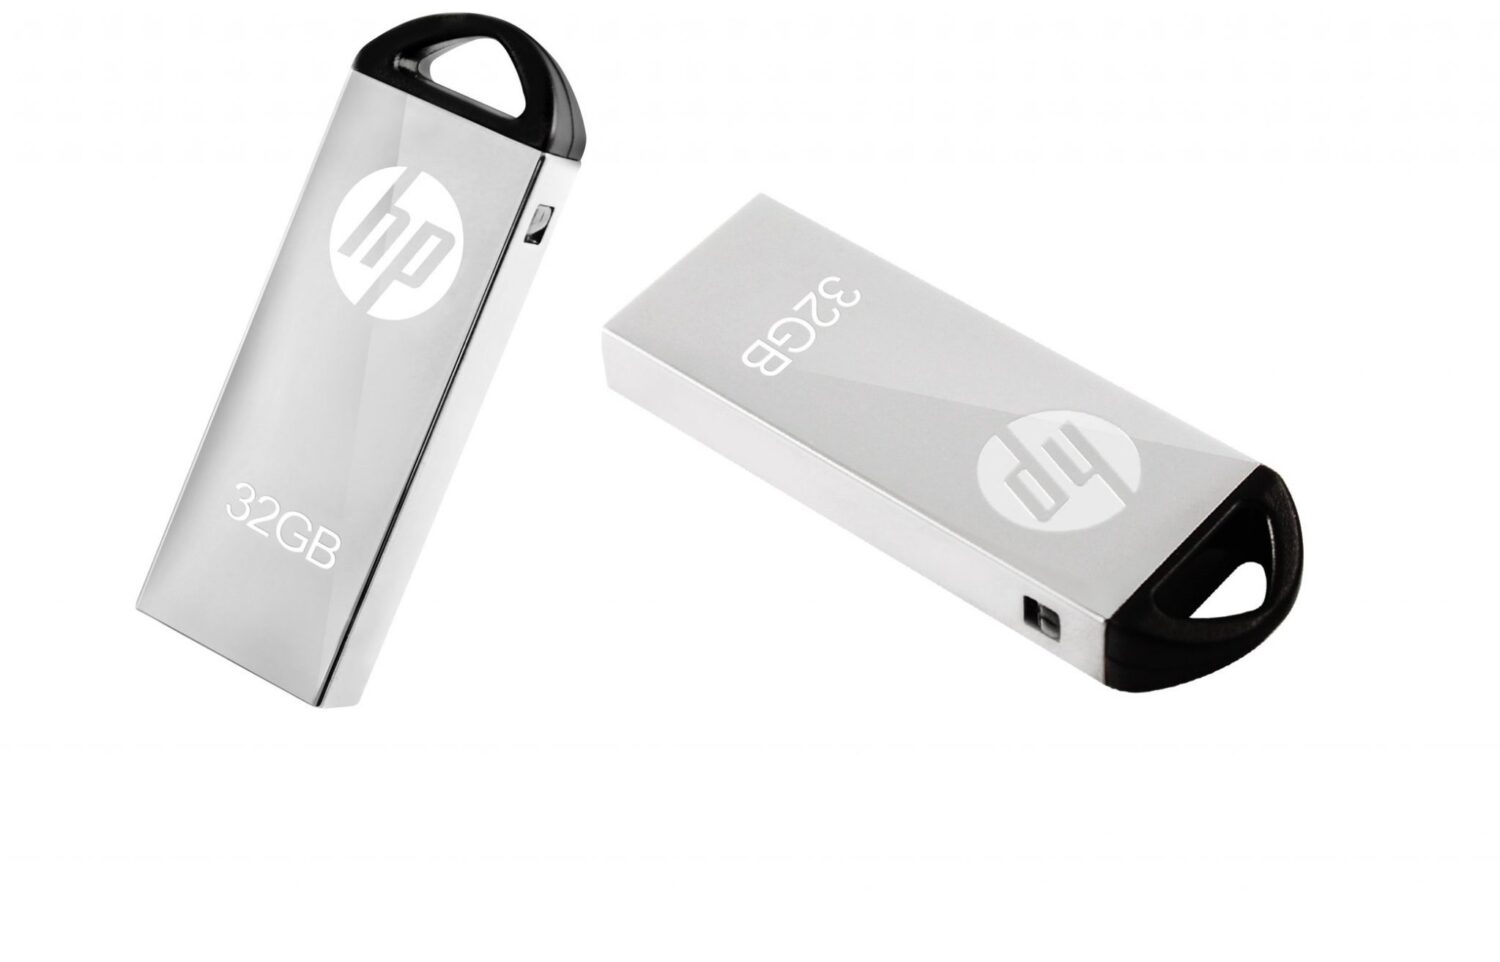 HP USB Pendrive 32 GB - Pack Of 2 Best 1+1 Combo Offer Fusion Tech